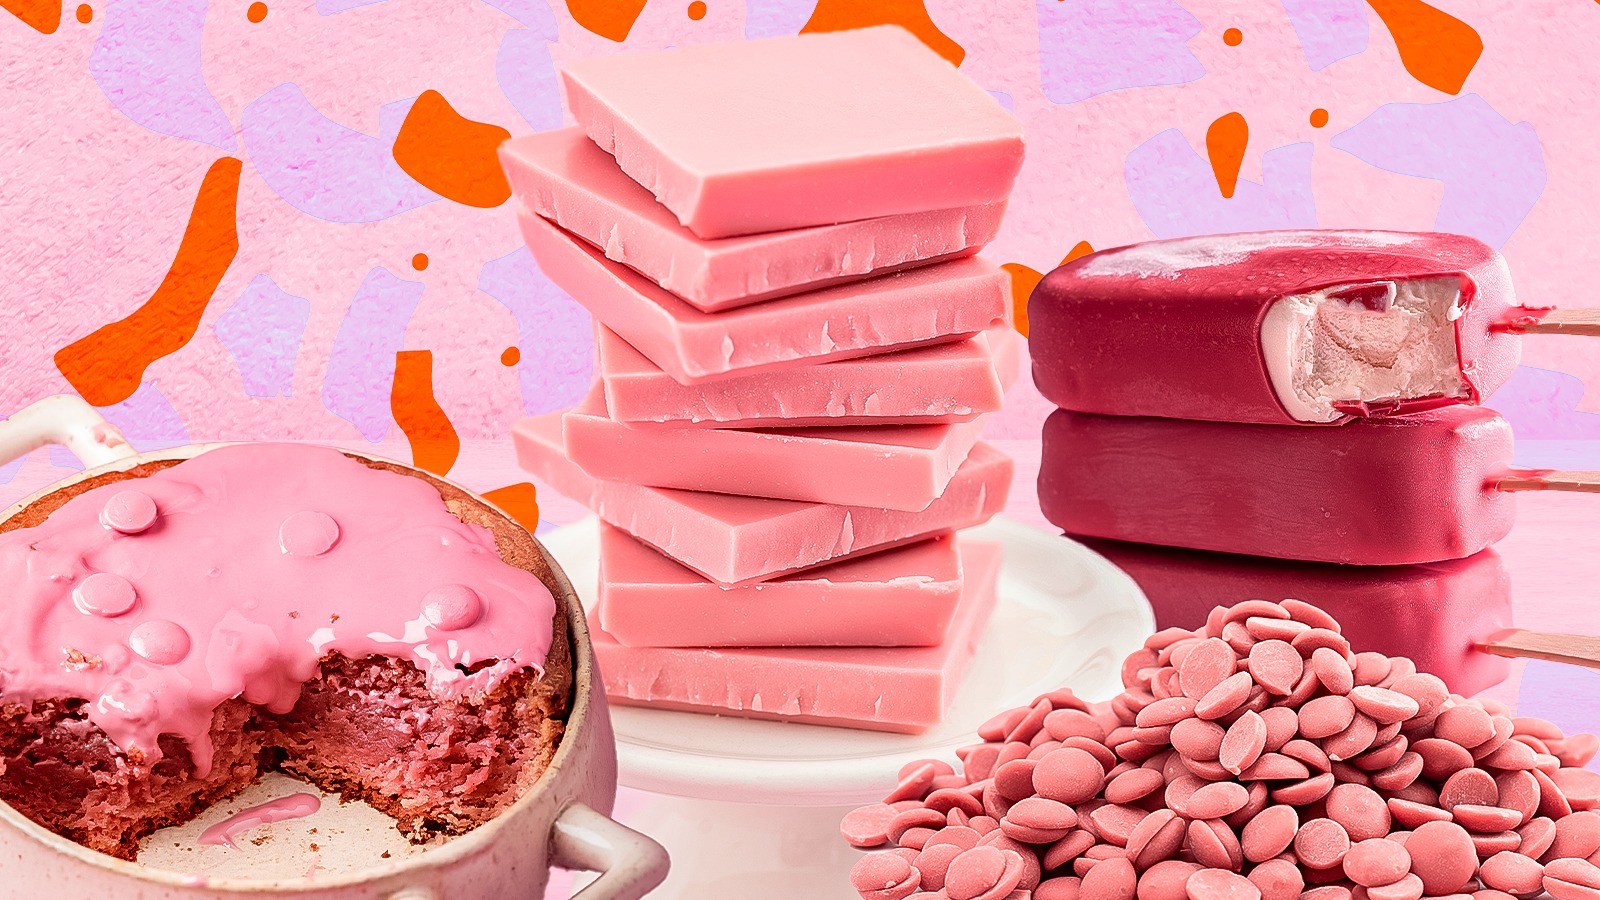 What is Ruby Chocolate? Newest Type of Chocolate Explained